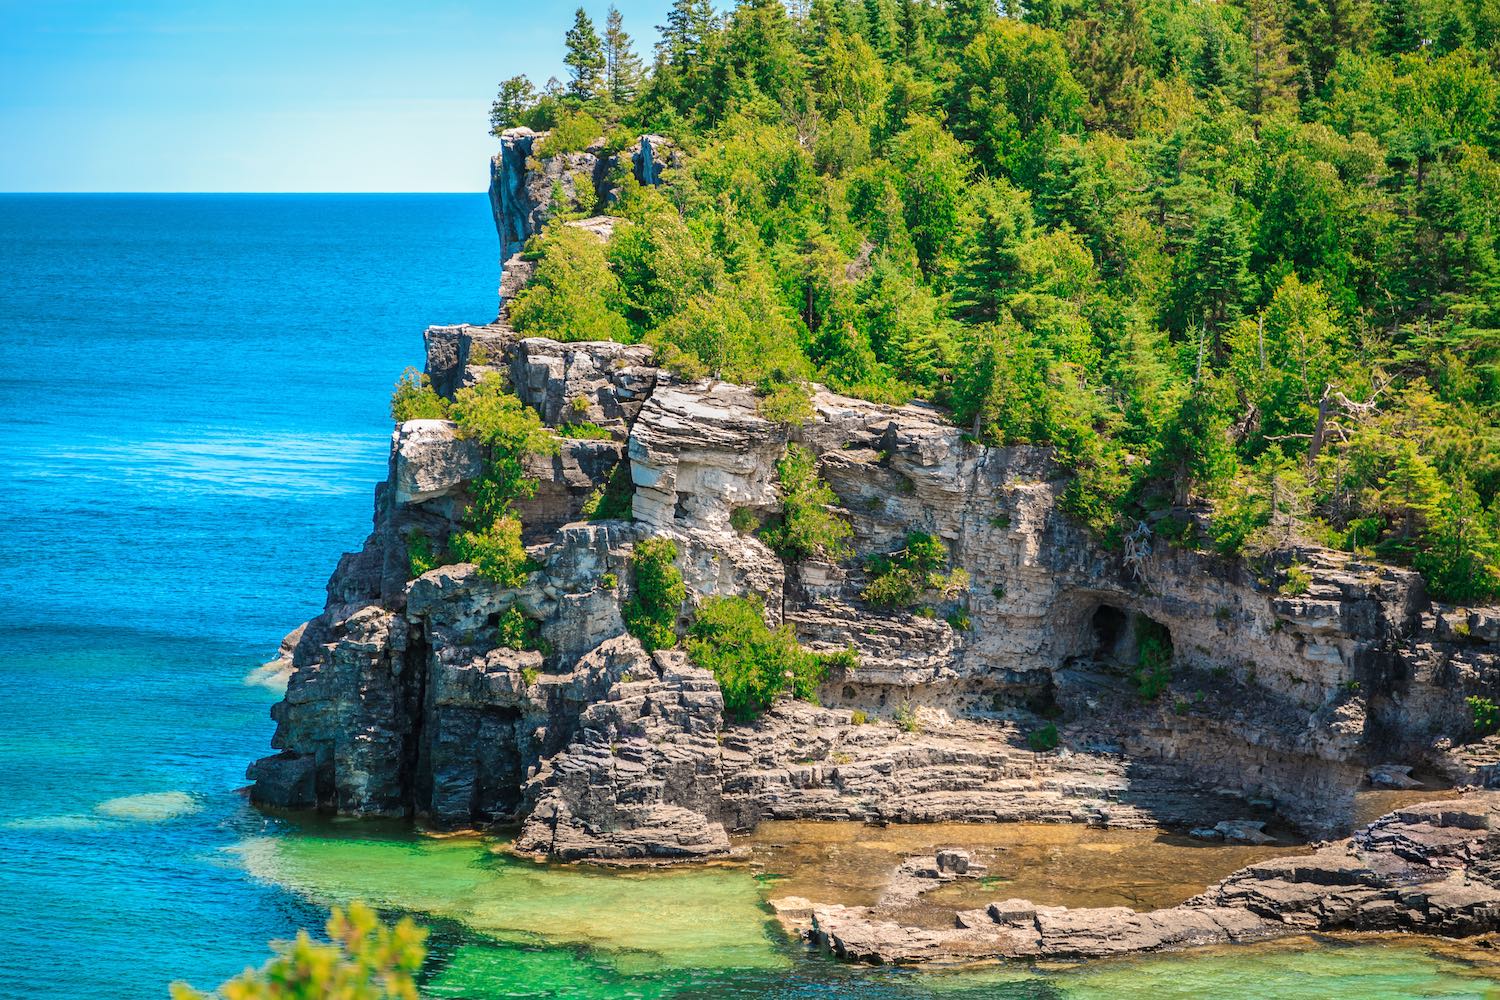 13 beautiful places in Ontario we wish we could visit right now